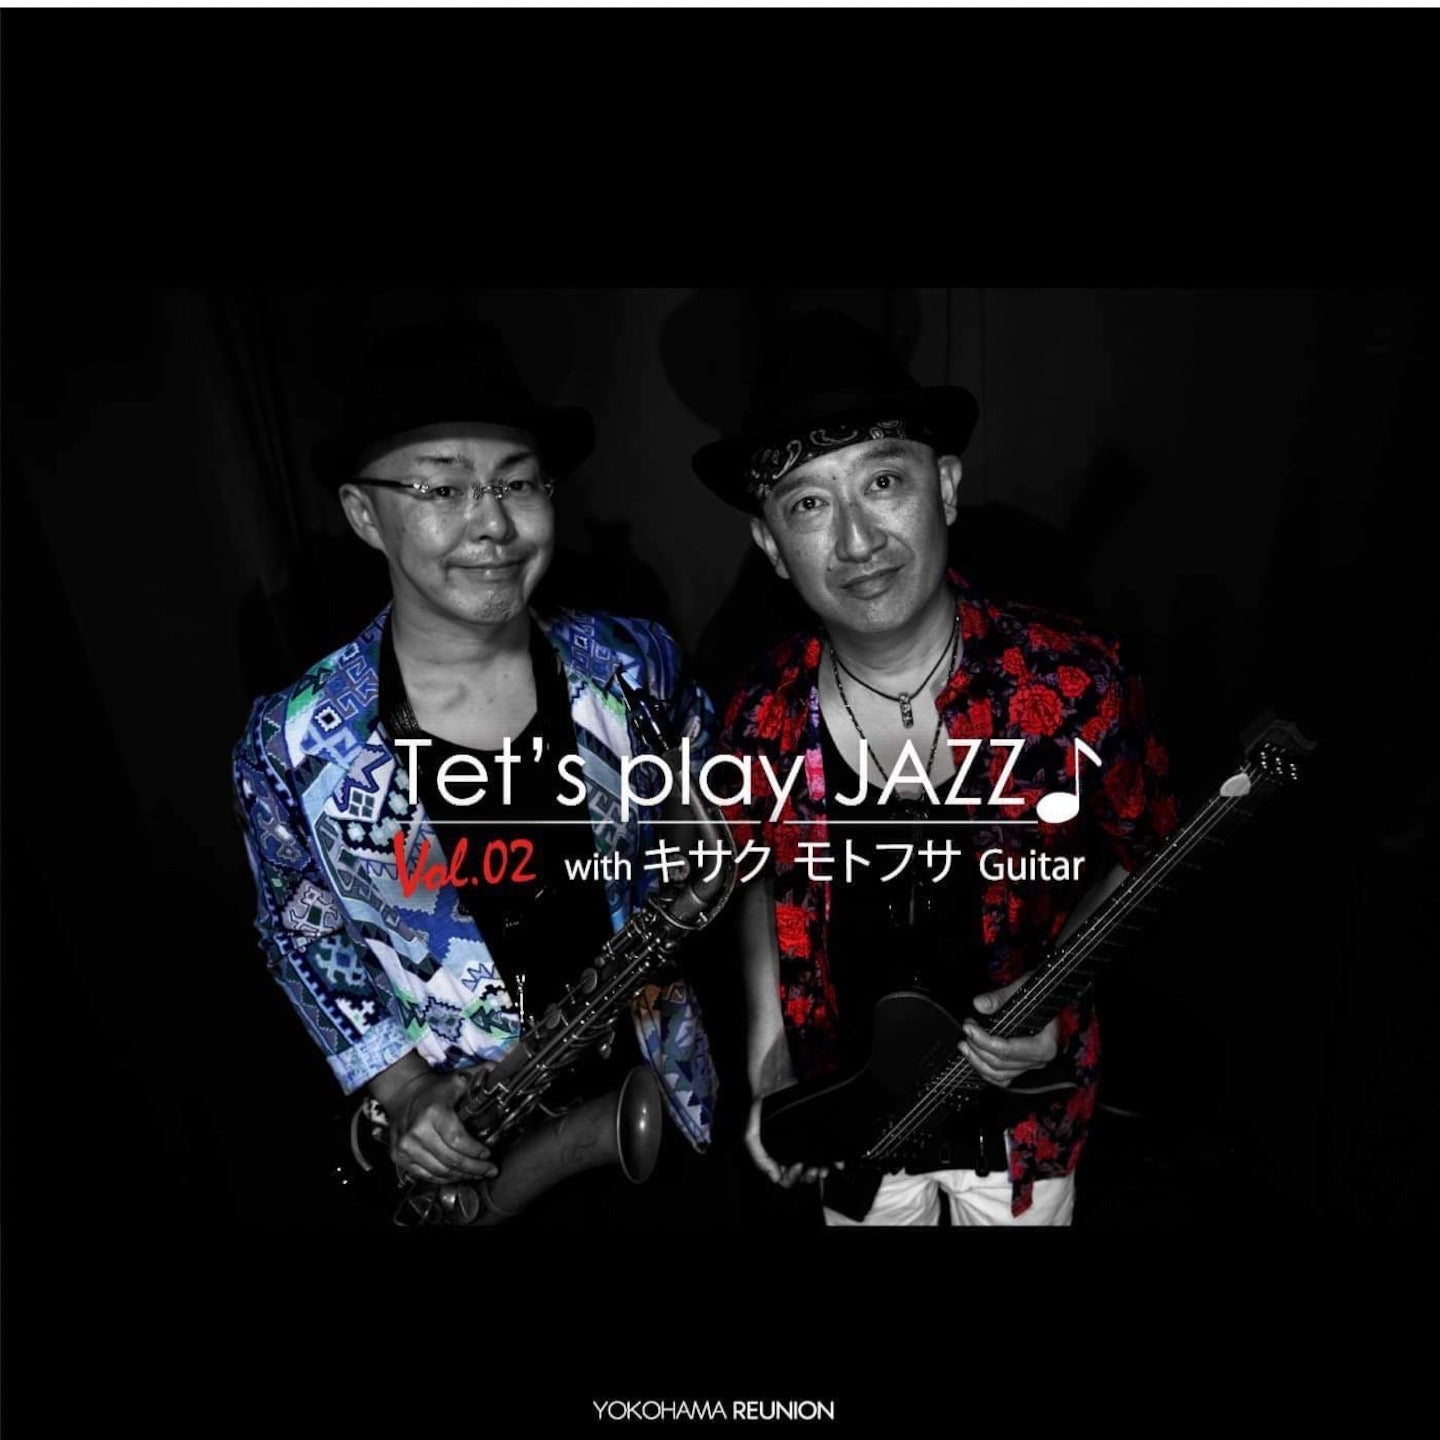 "Tet's play JAZZ ♪ with キサク モトフサ" Live 応援チケット 一口1000円